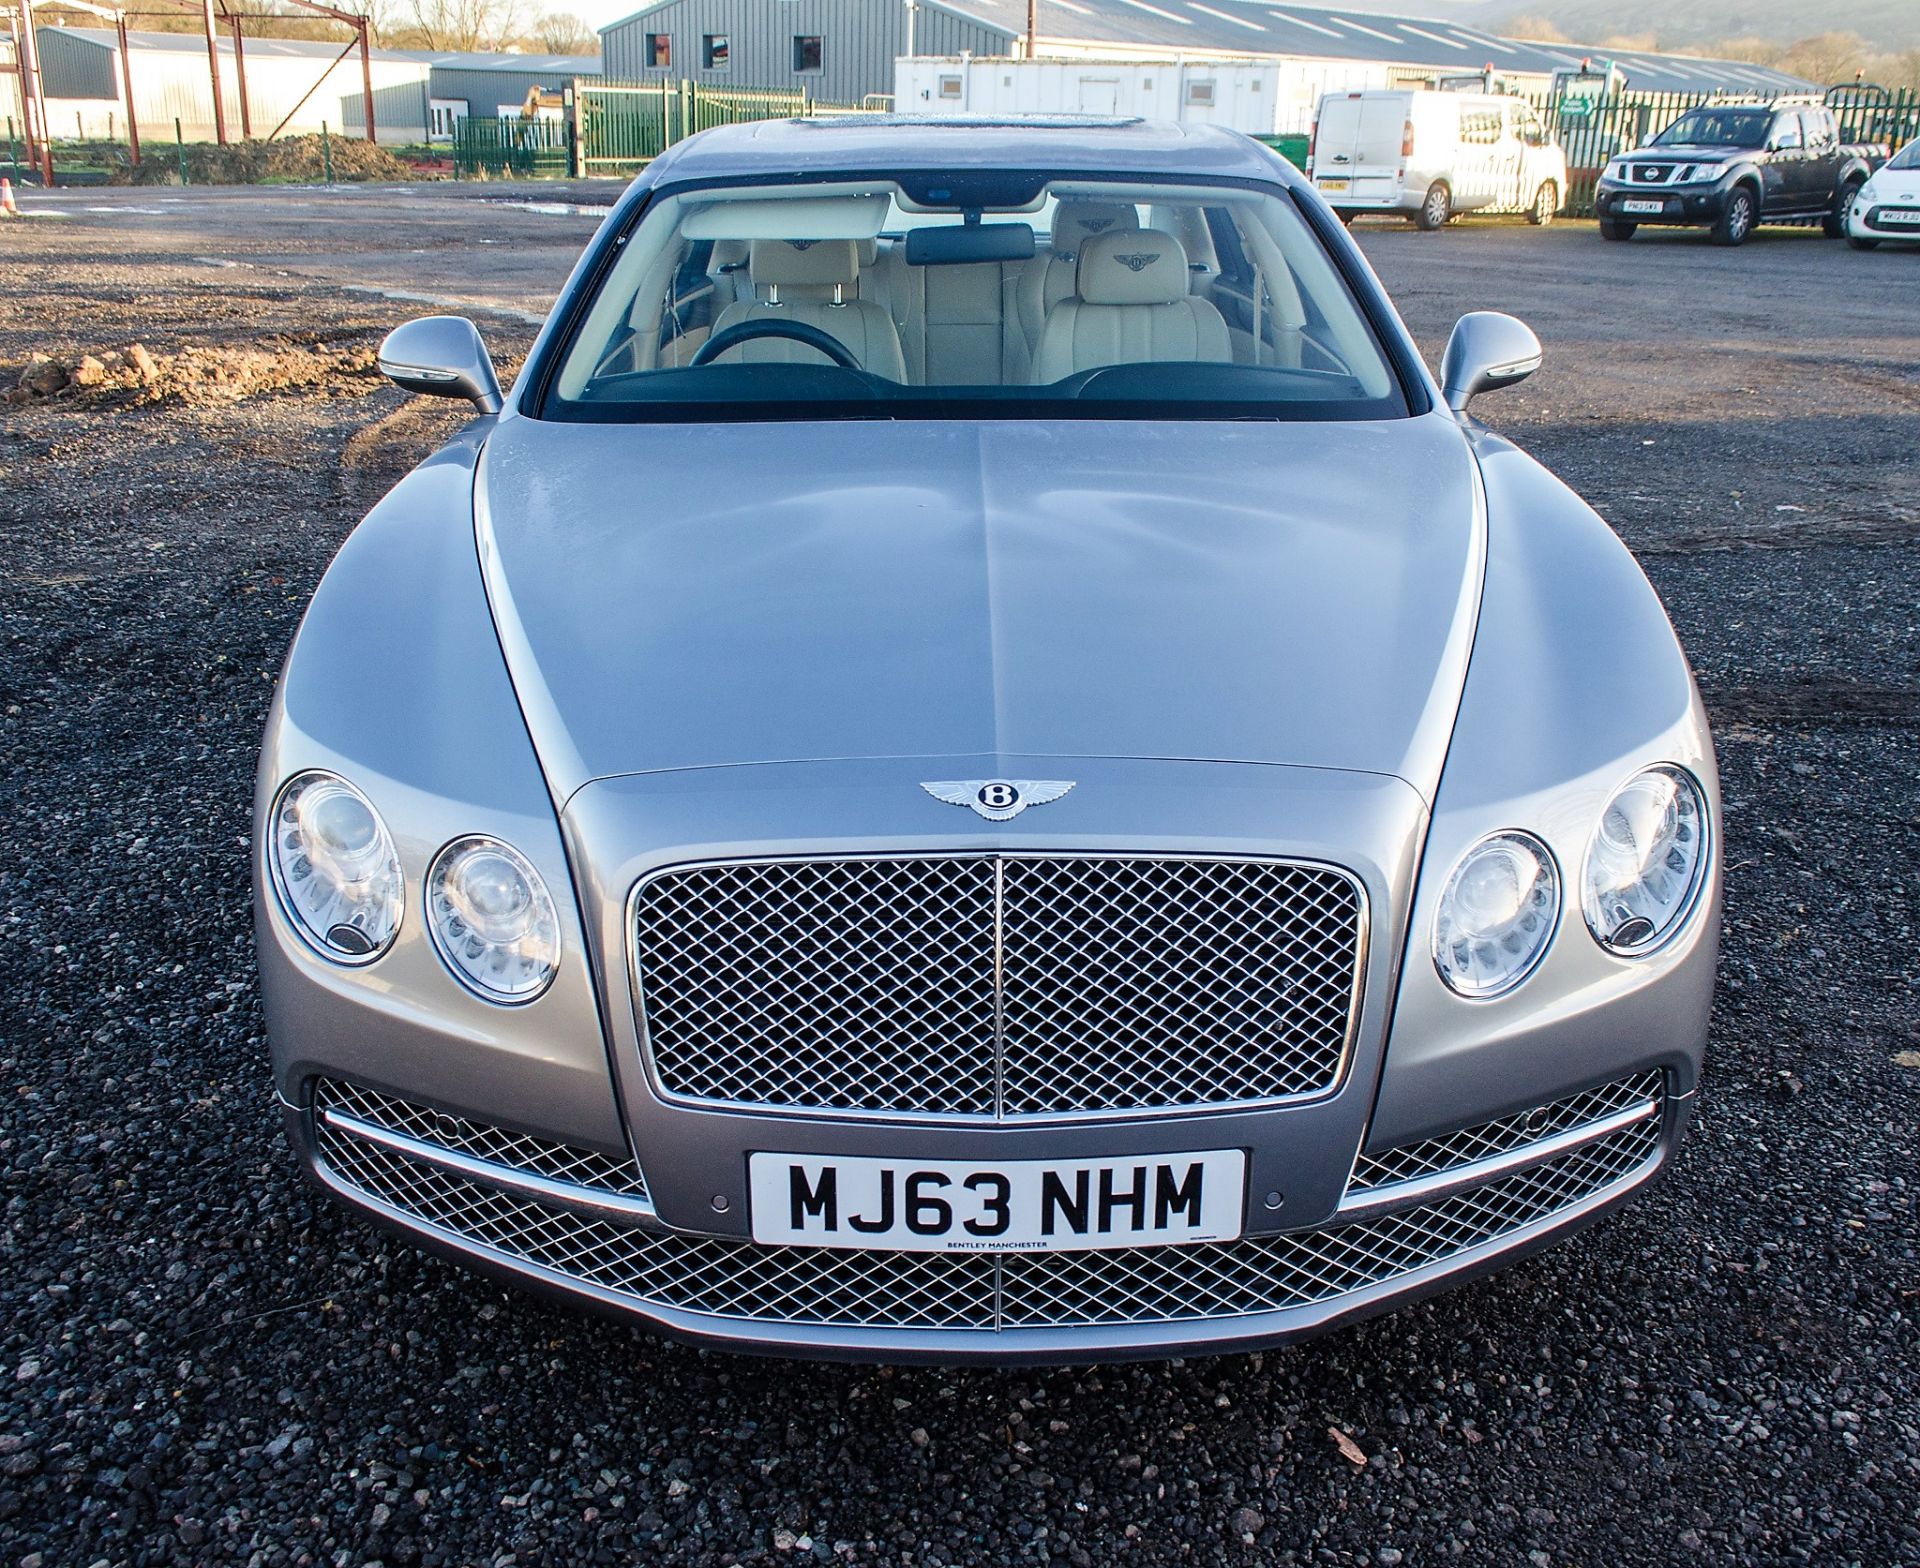 Bentley Flying Spur 6.0 W12 automatic 4 door saloon car Registration Number: MJ63 NHM Date of - Image 6 of 51